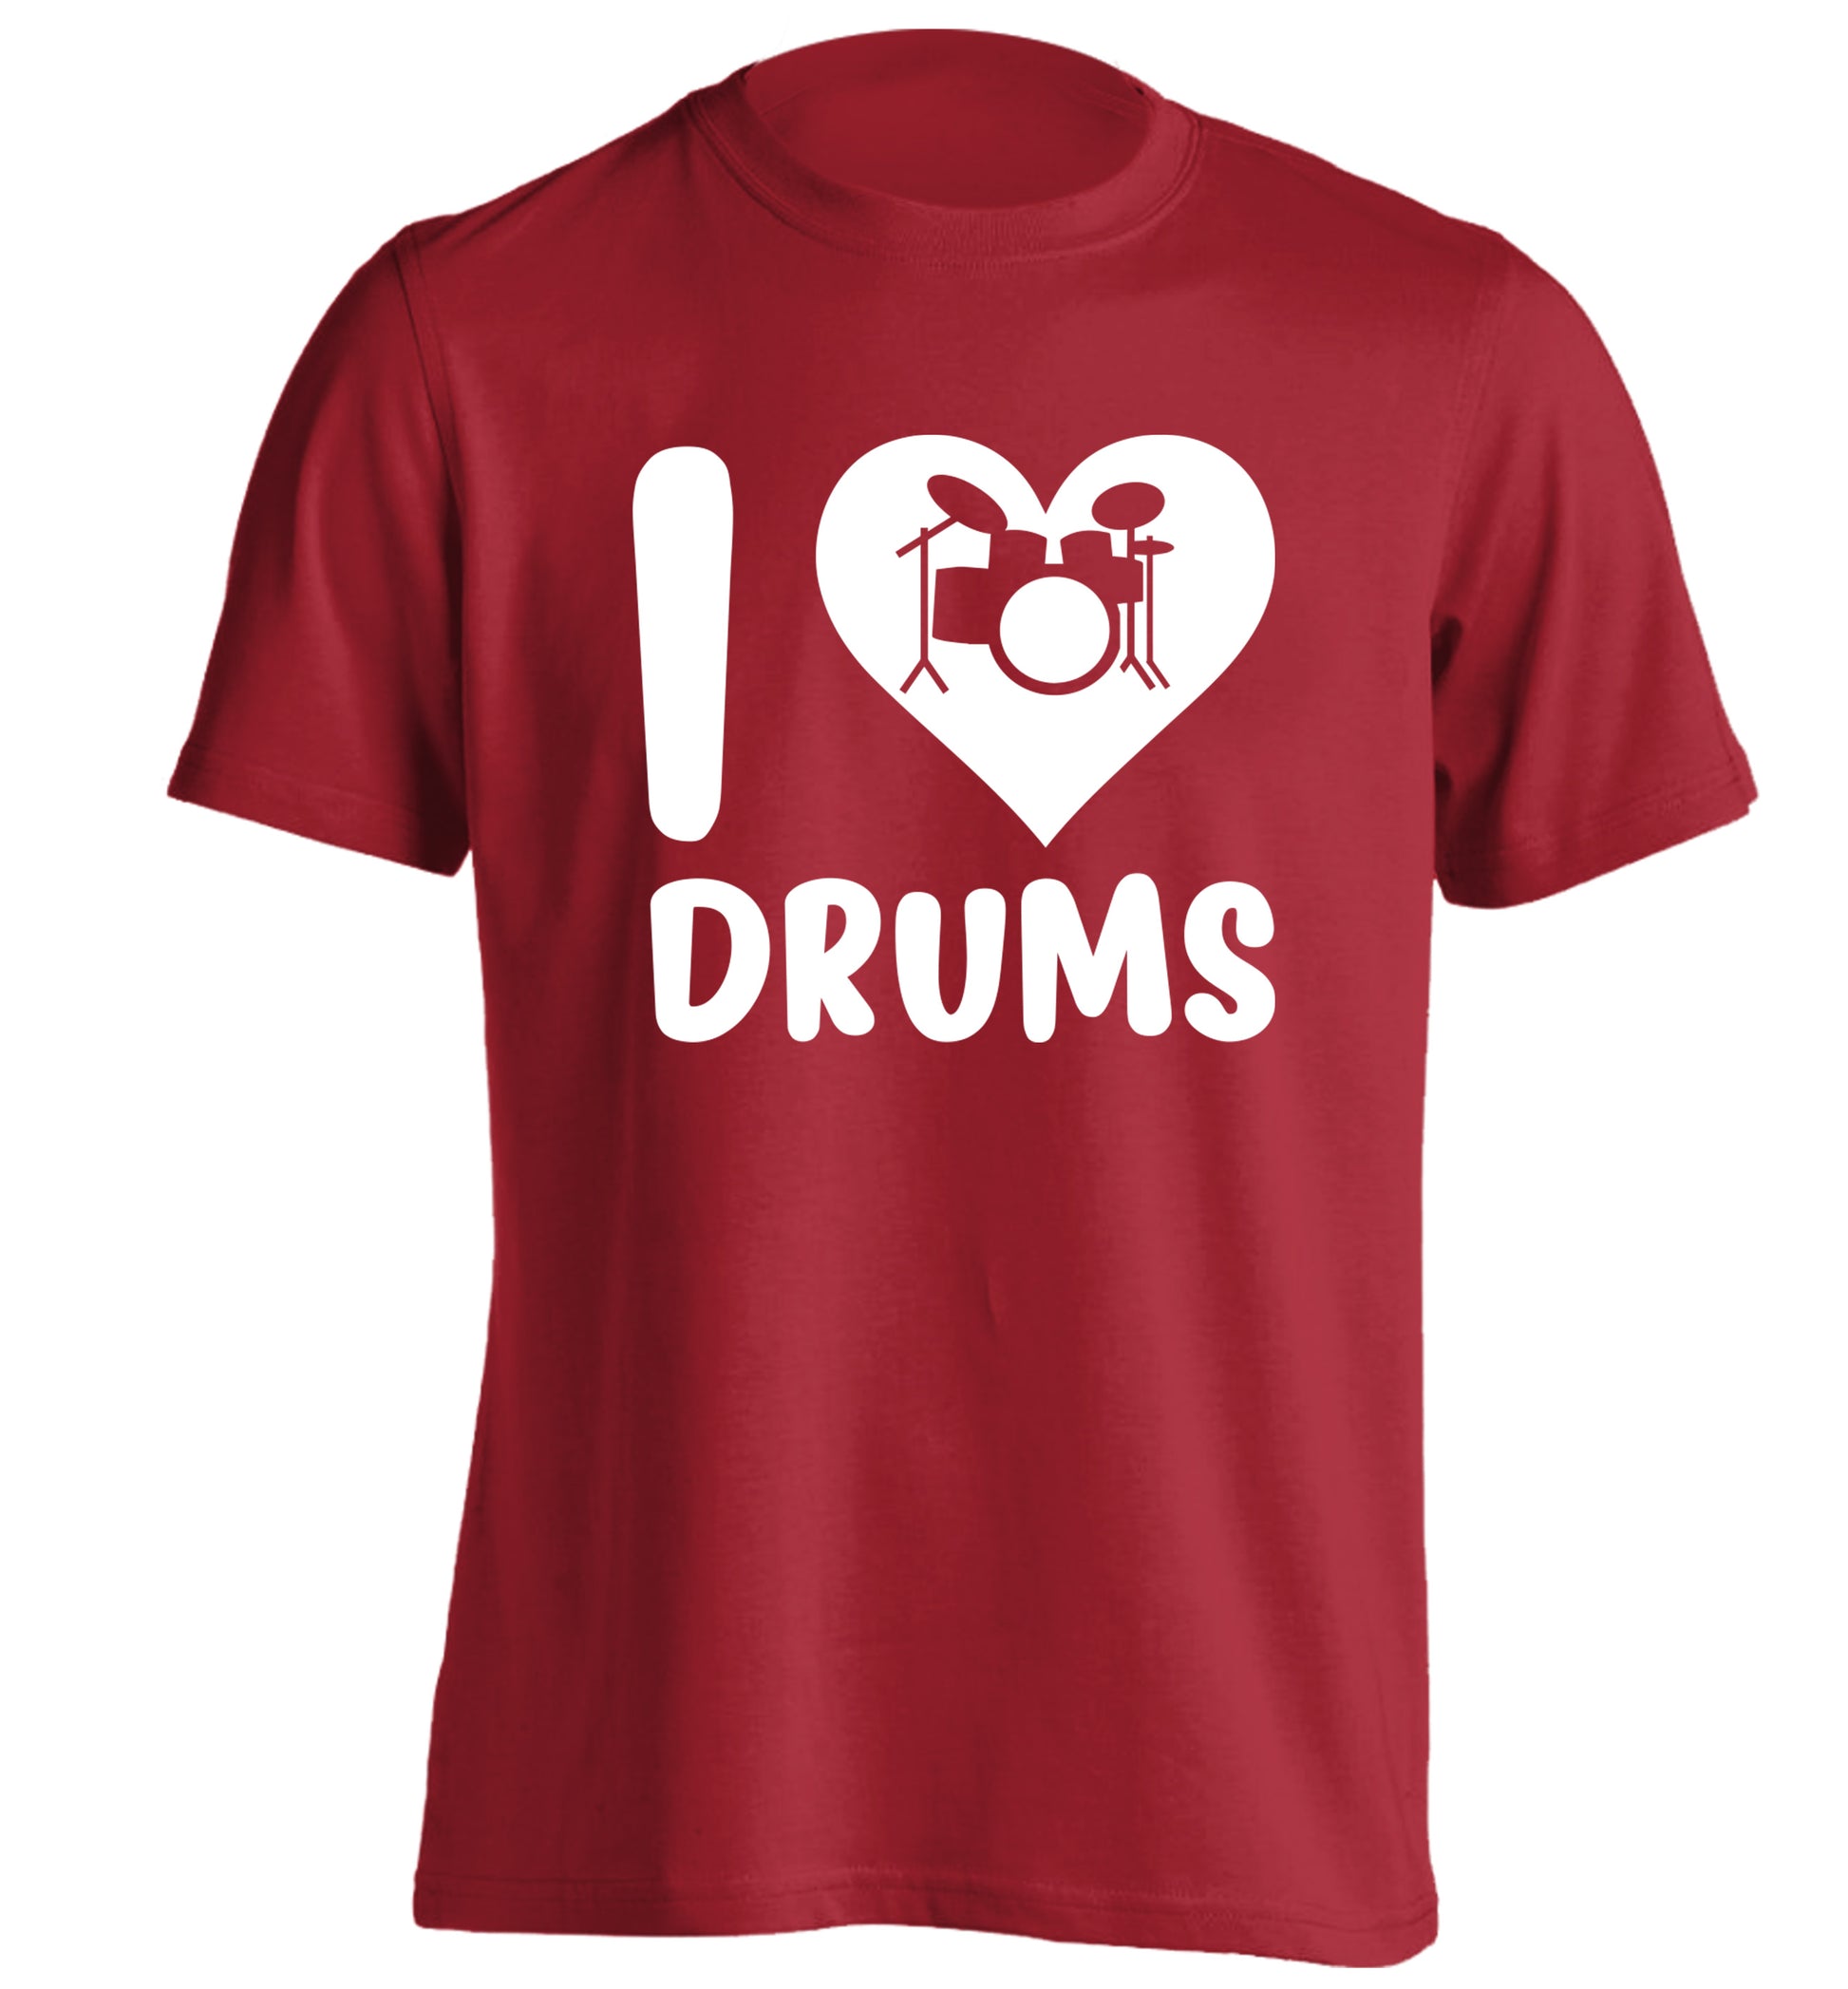 I love drums adults unisex red Tshirt 2XL